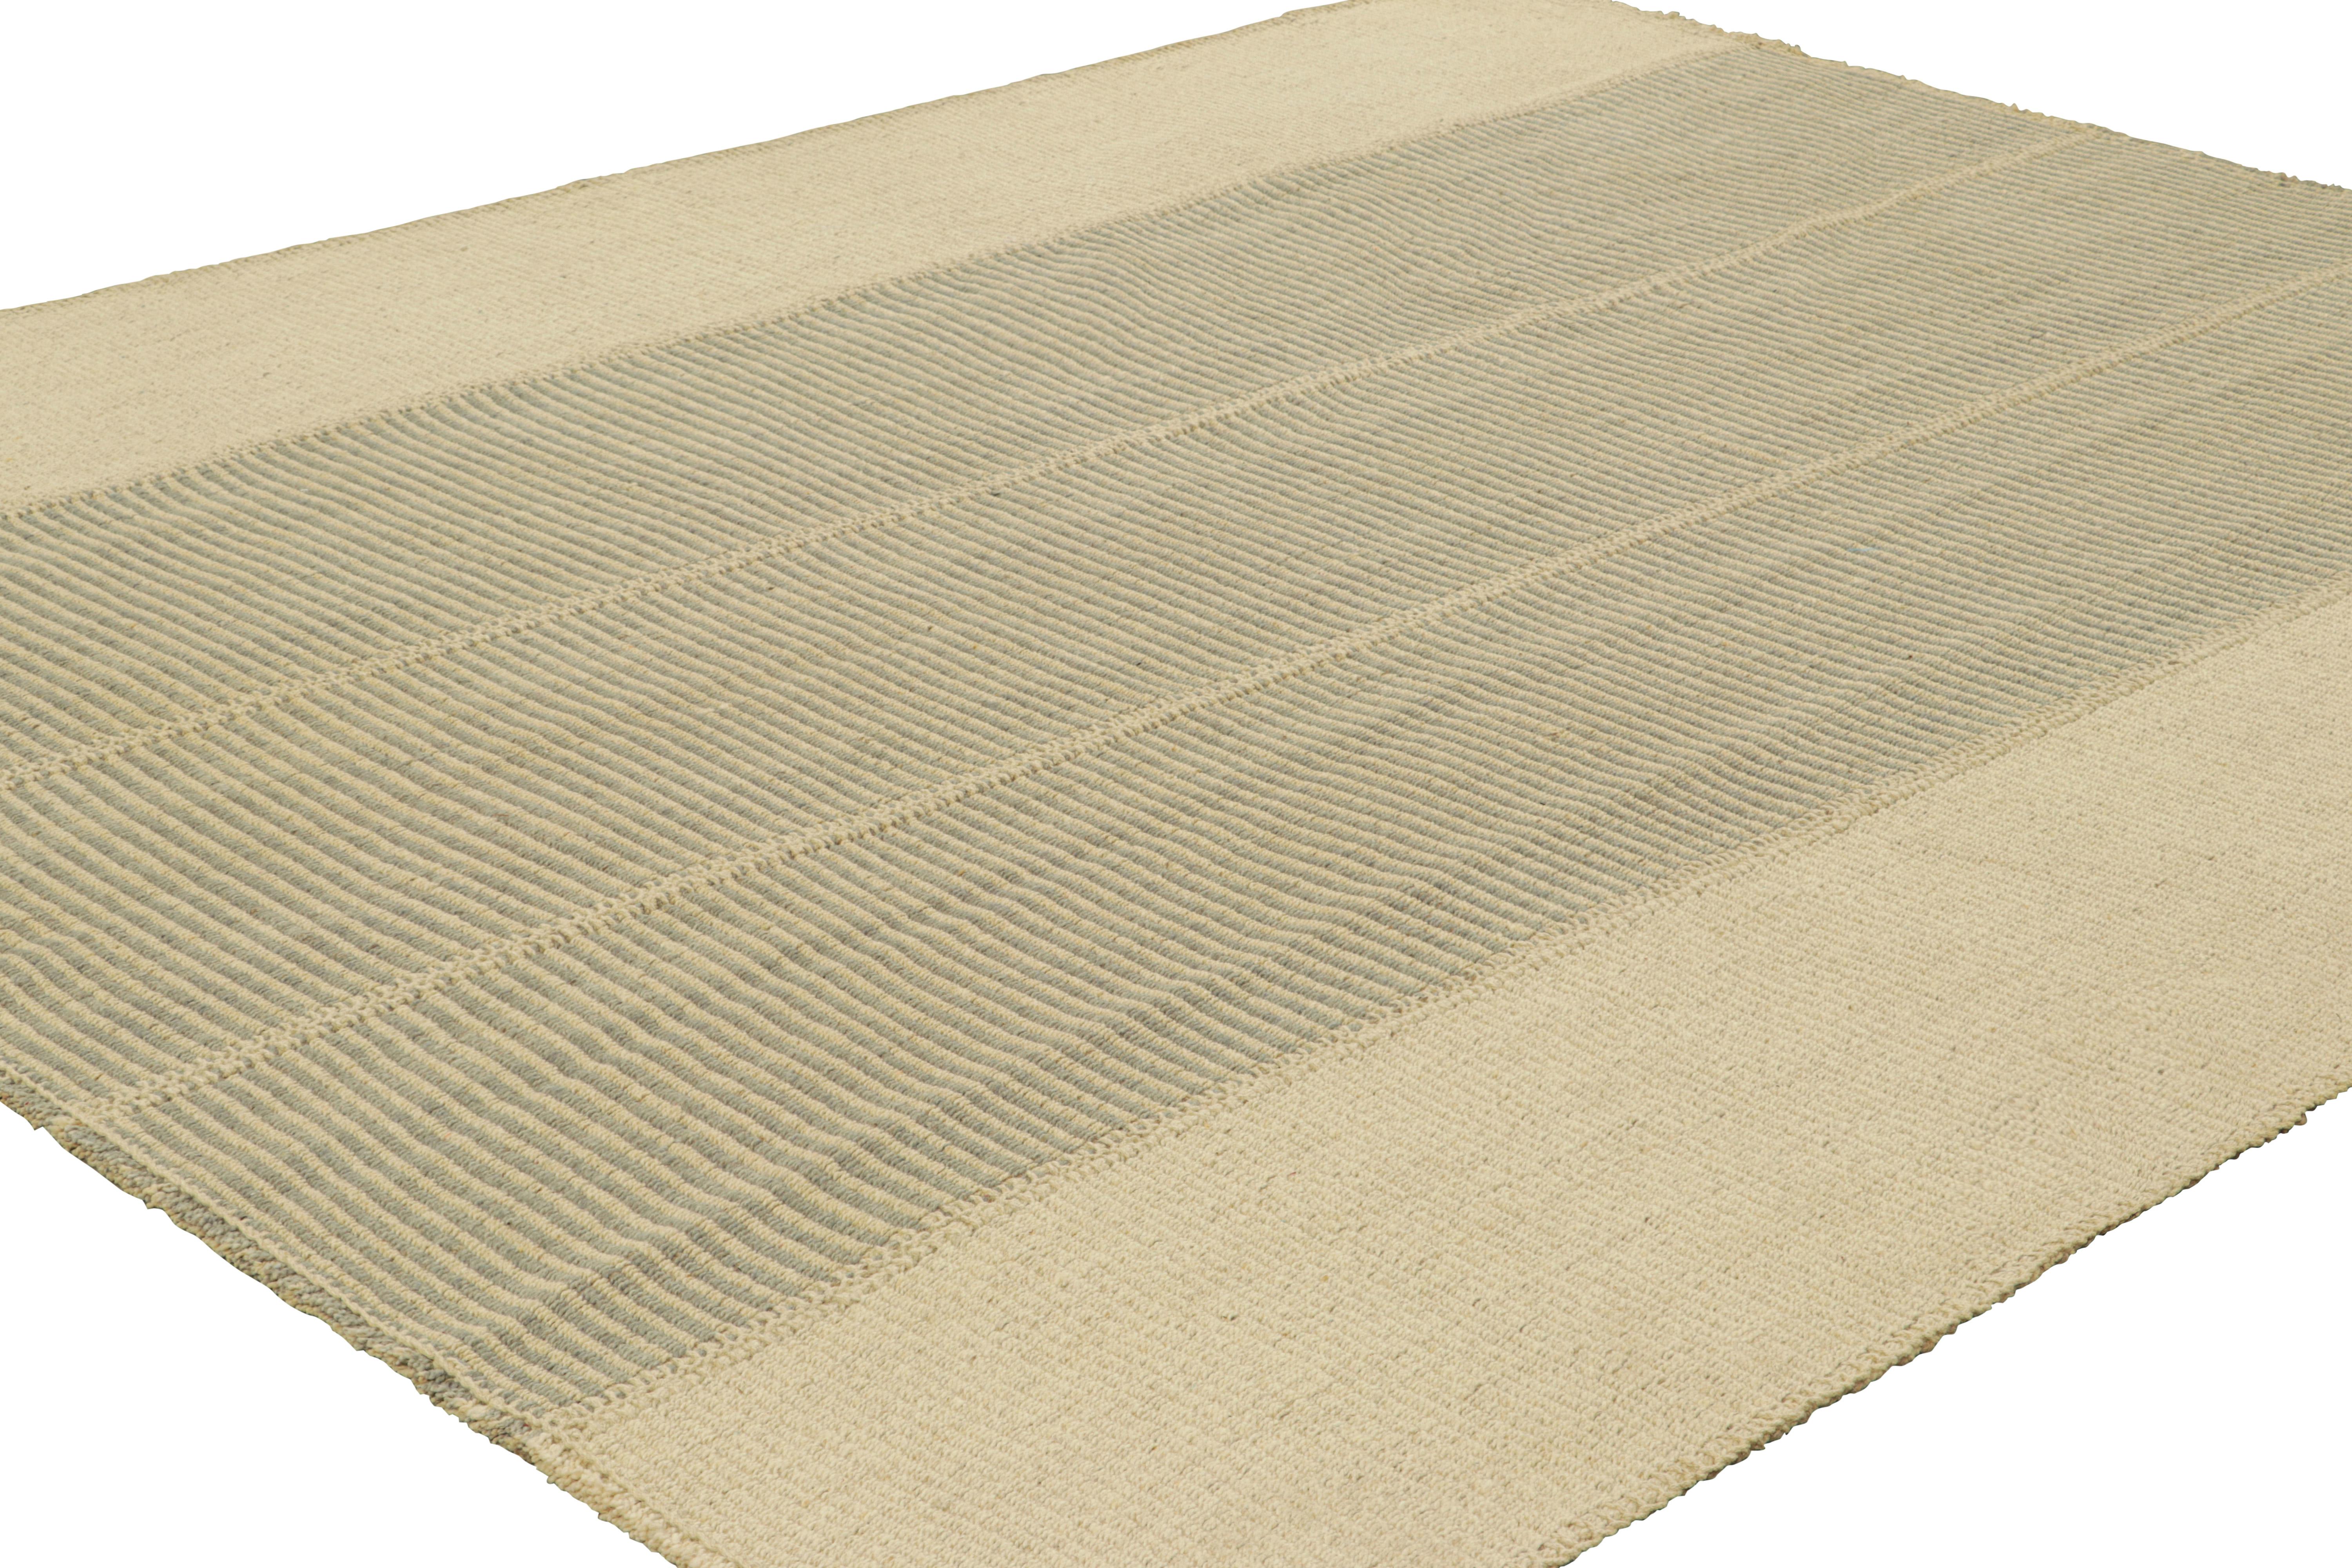 Afghan Rug & Kilim’s Contemporary Kilim in Beige and Gray Textural Stripes For Sale